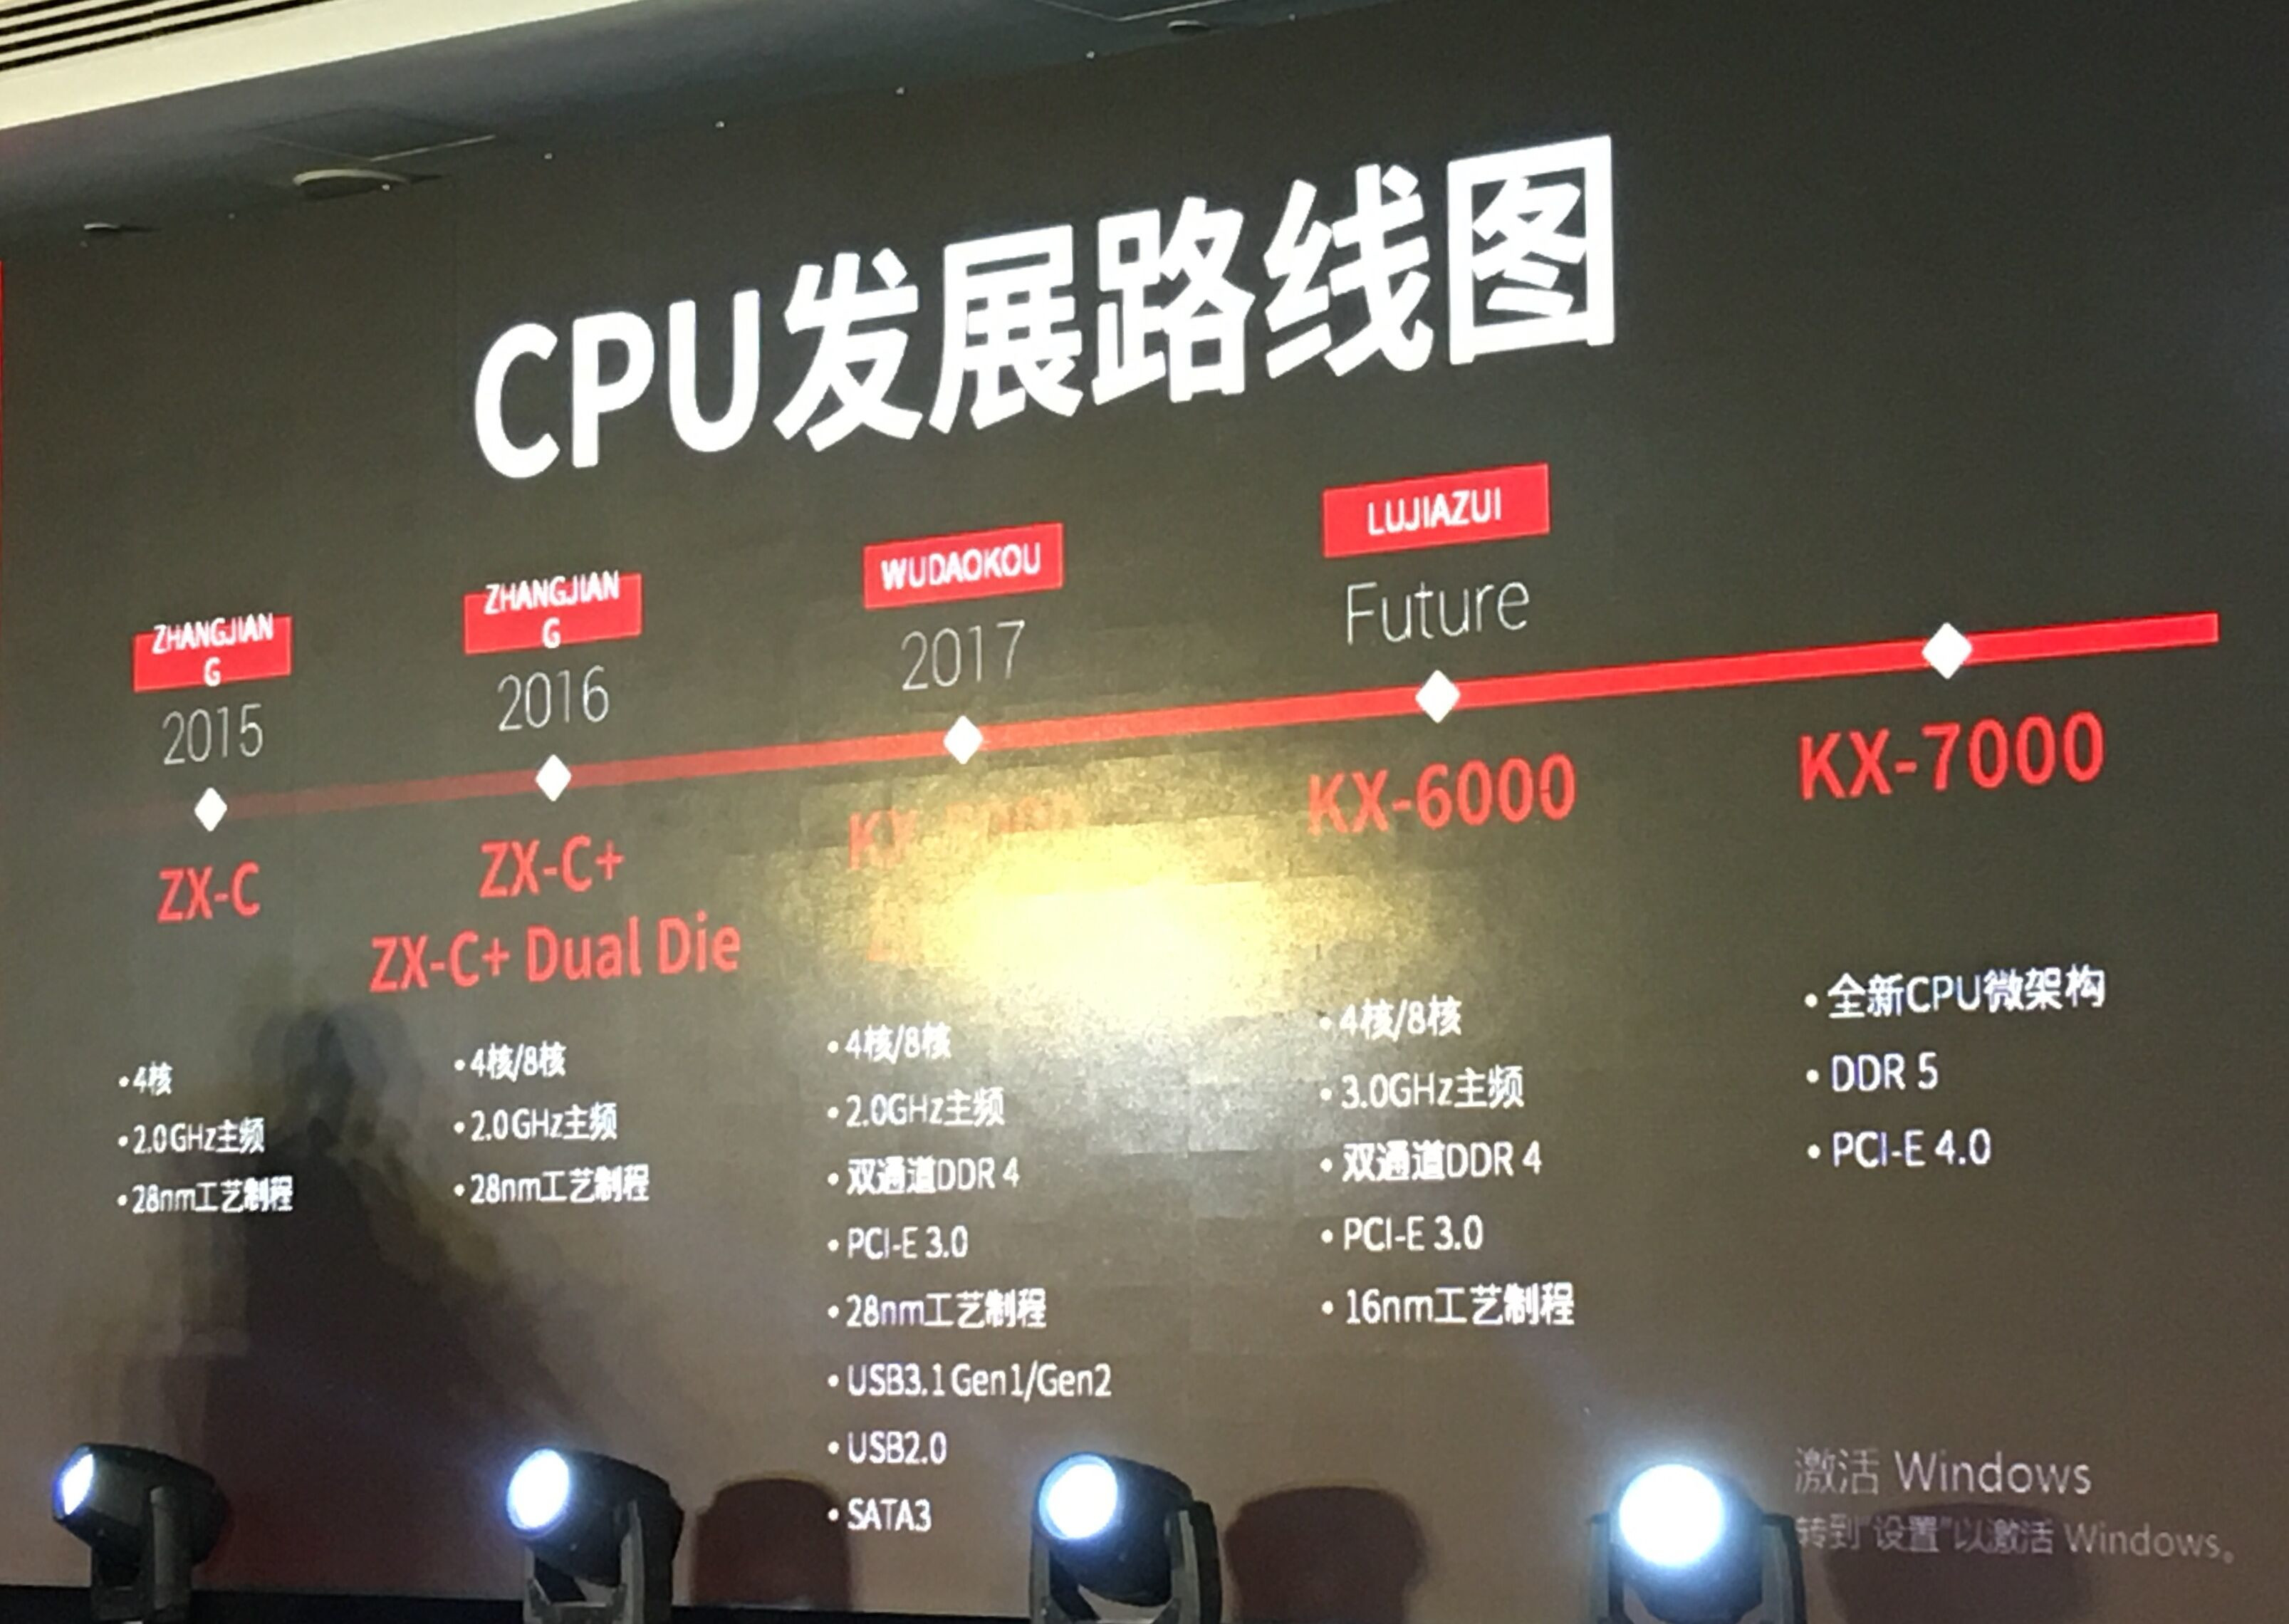 VIA Making a Comeback to x86 CPU Market with Zhaoxin R&D Monies 